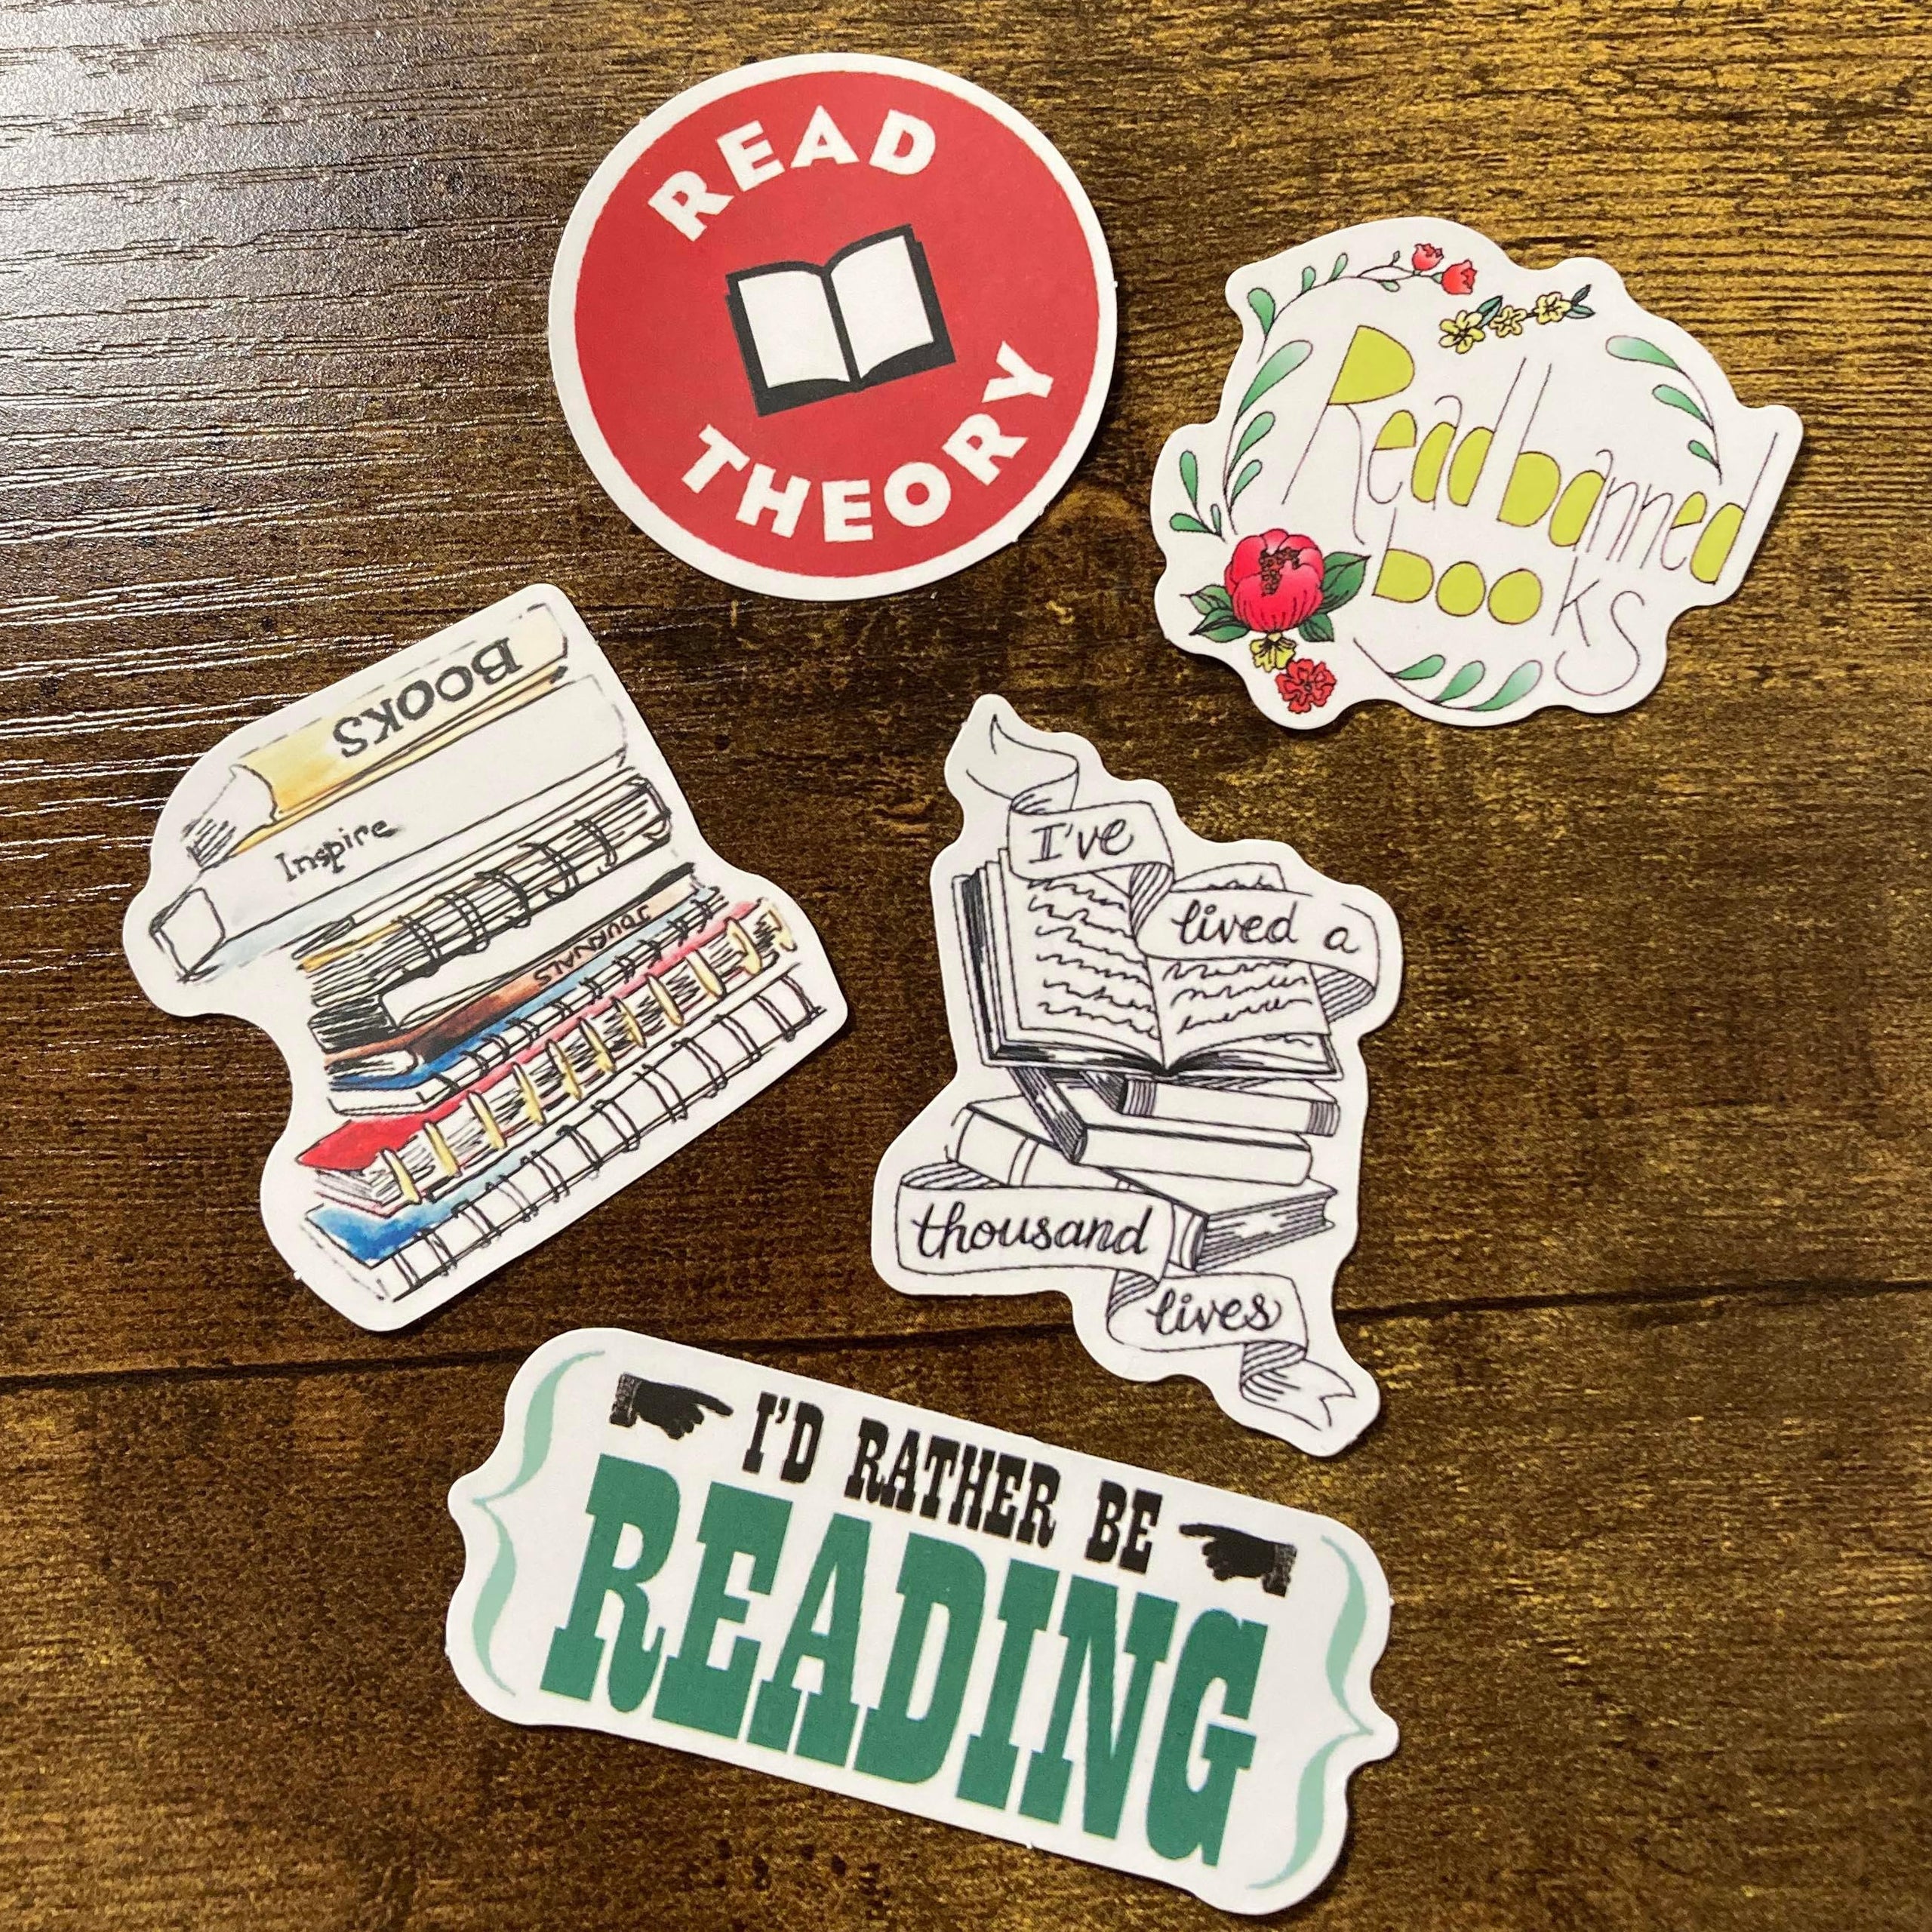 Book Lover Stickers